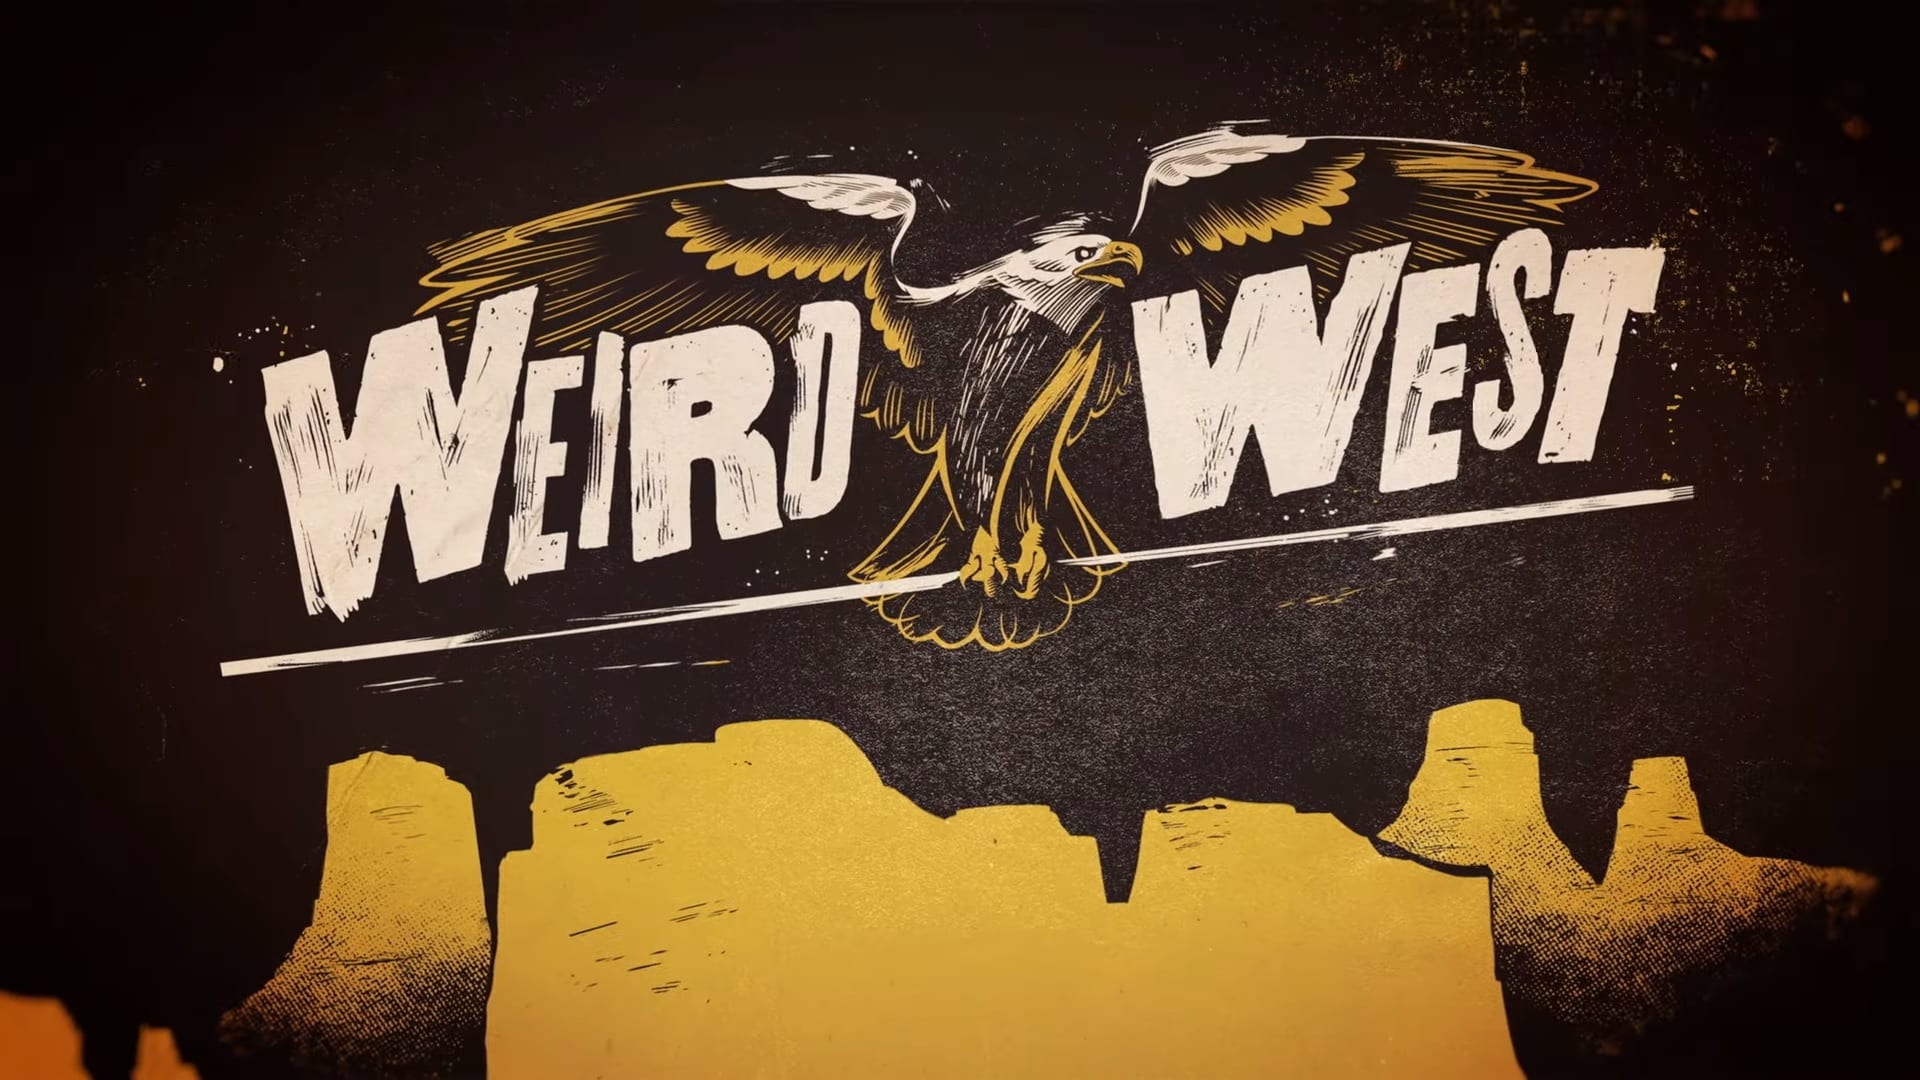 Wolfeye Studios' First Game Will be a Wild West RPG Titled Weird West